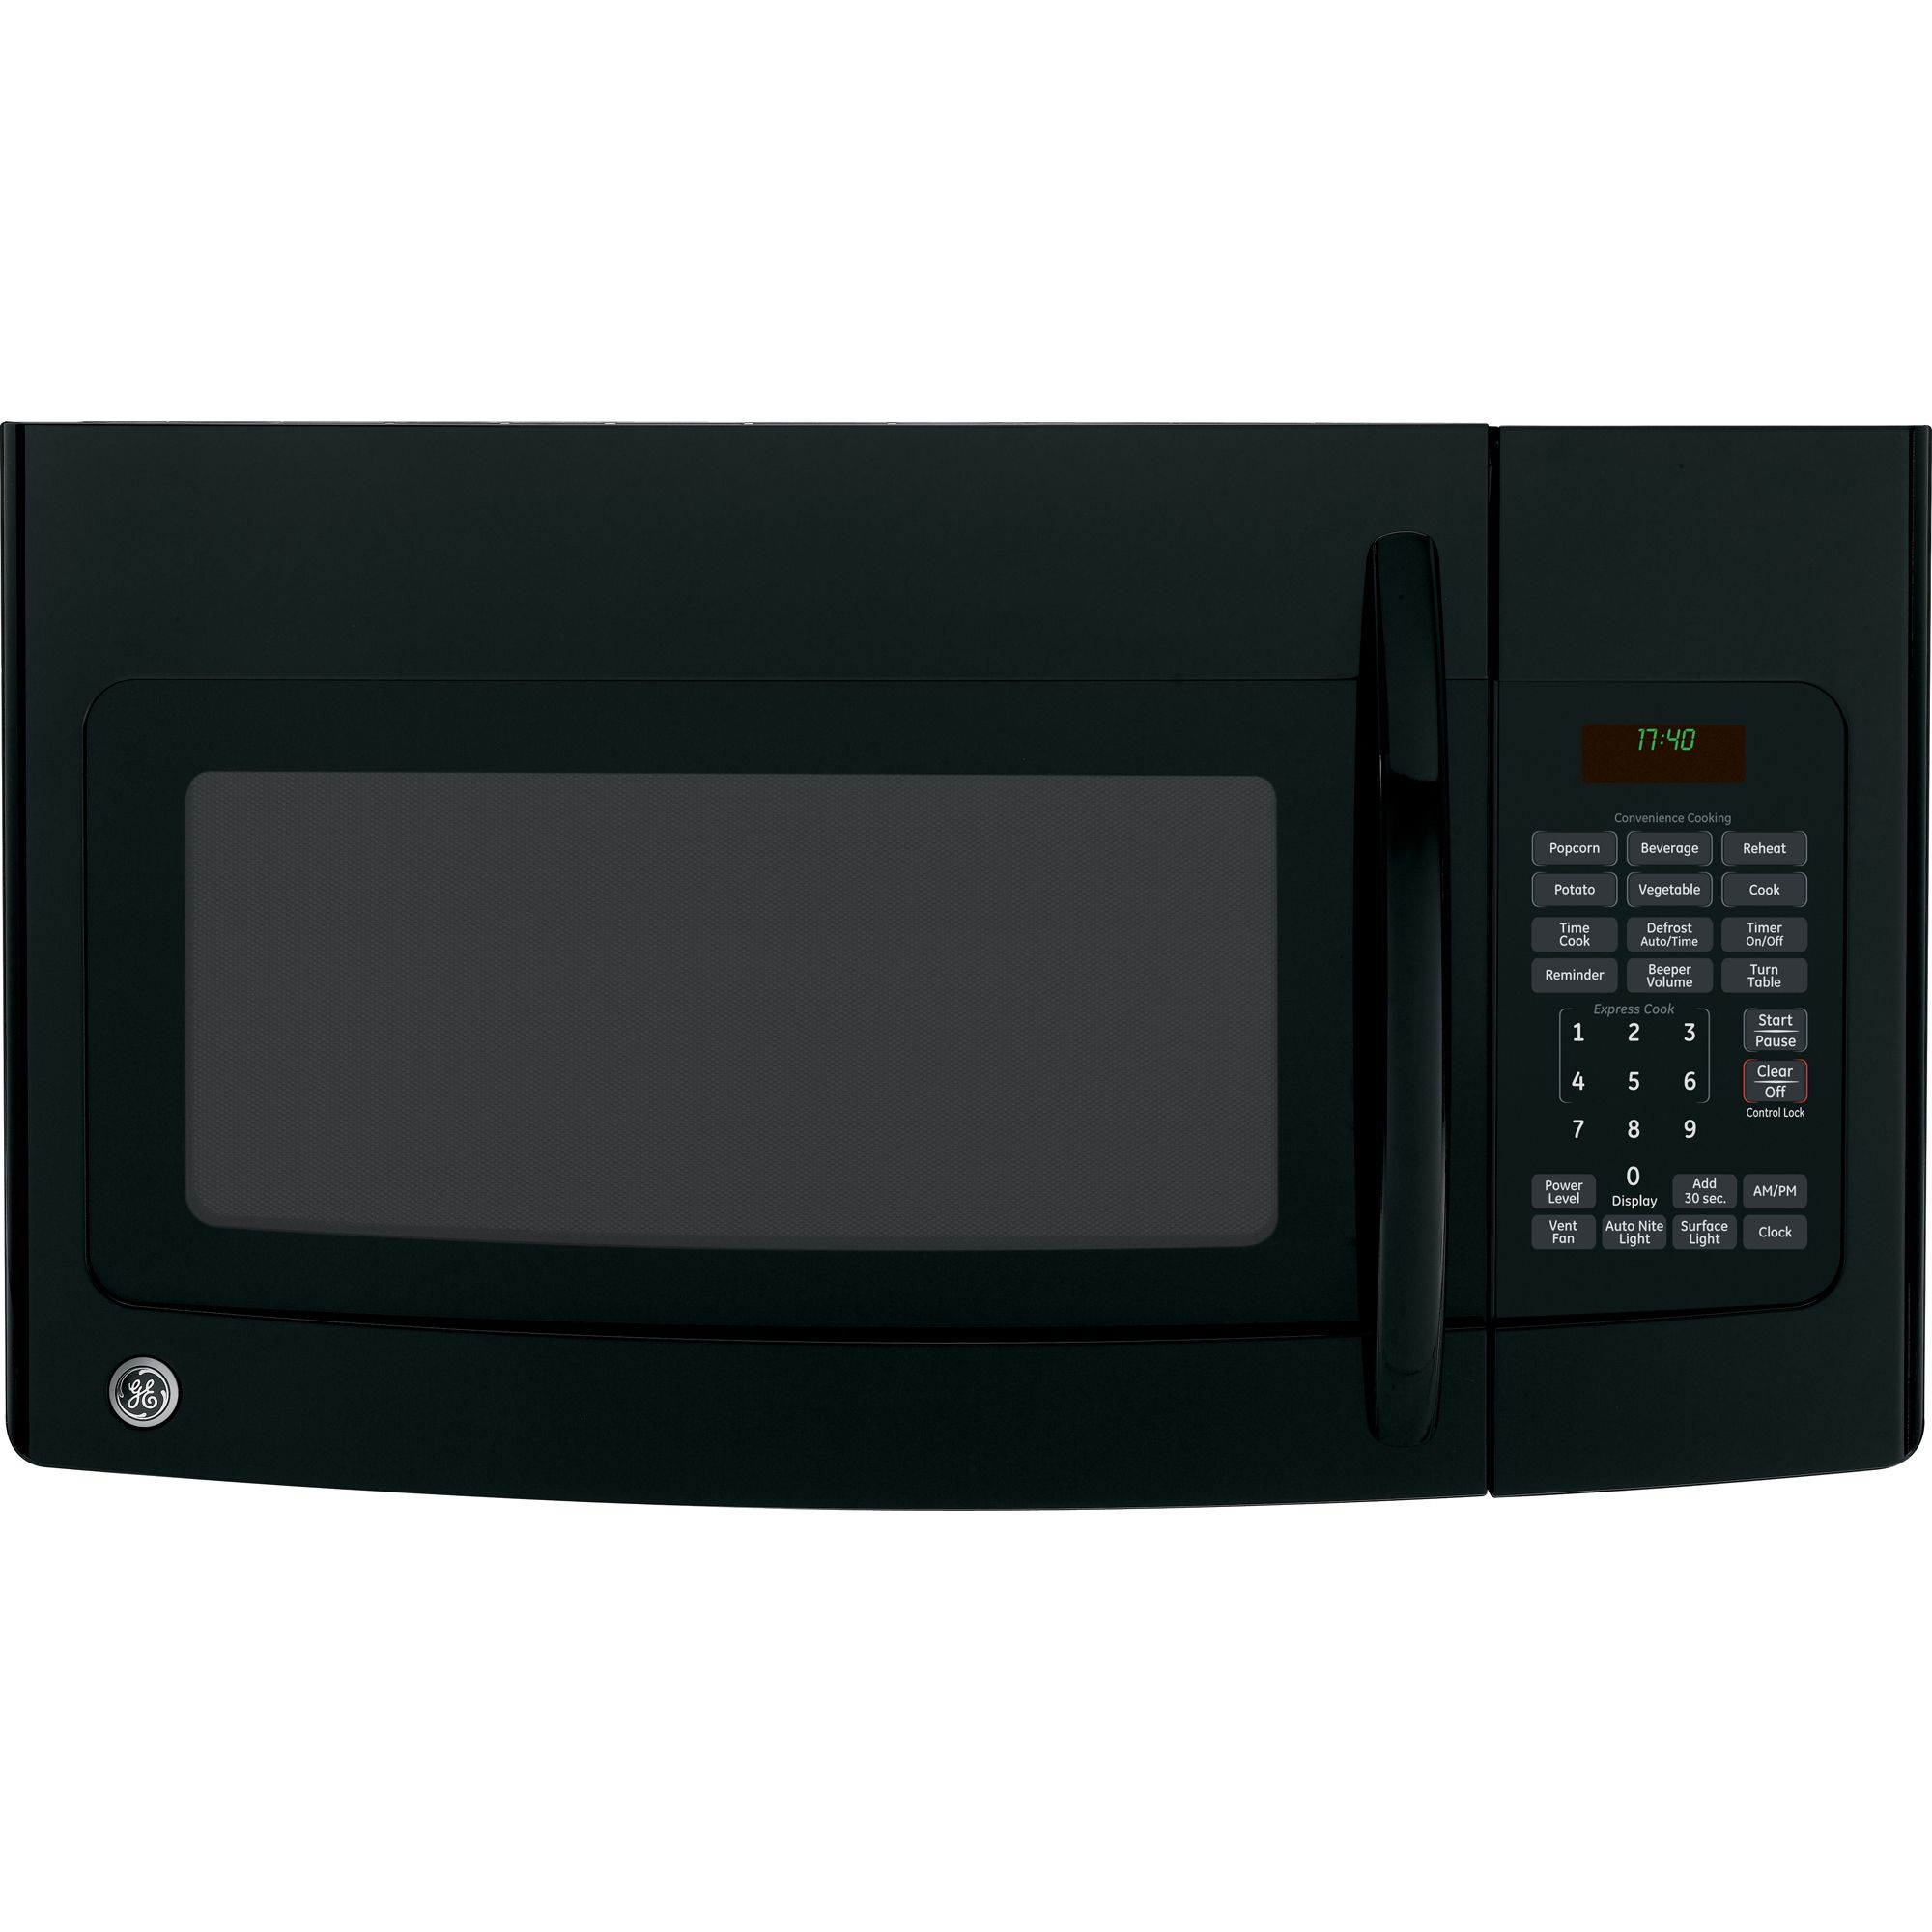 GE Appliances 022-81419-000,JVM1740DPBB 30 in. 1.7 cu. ft. Microwave Oven